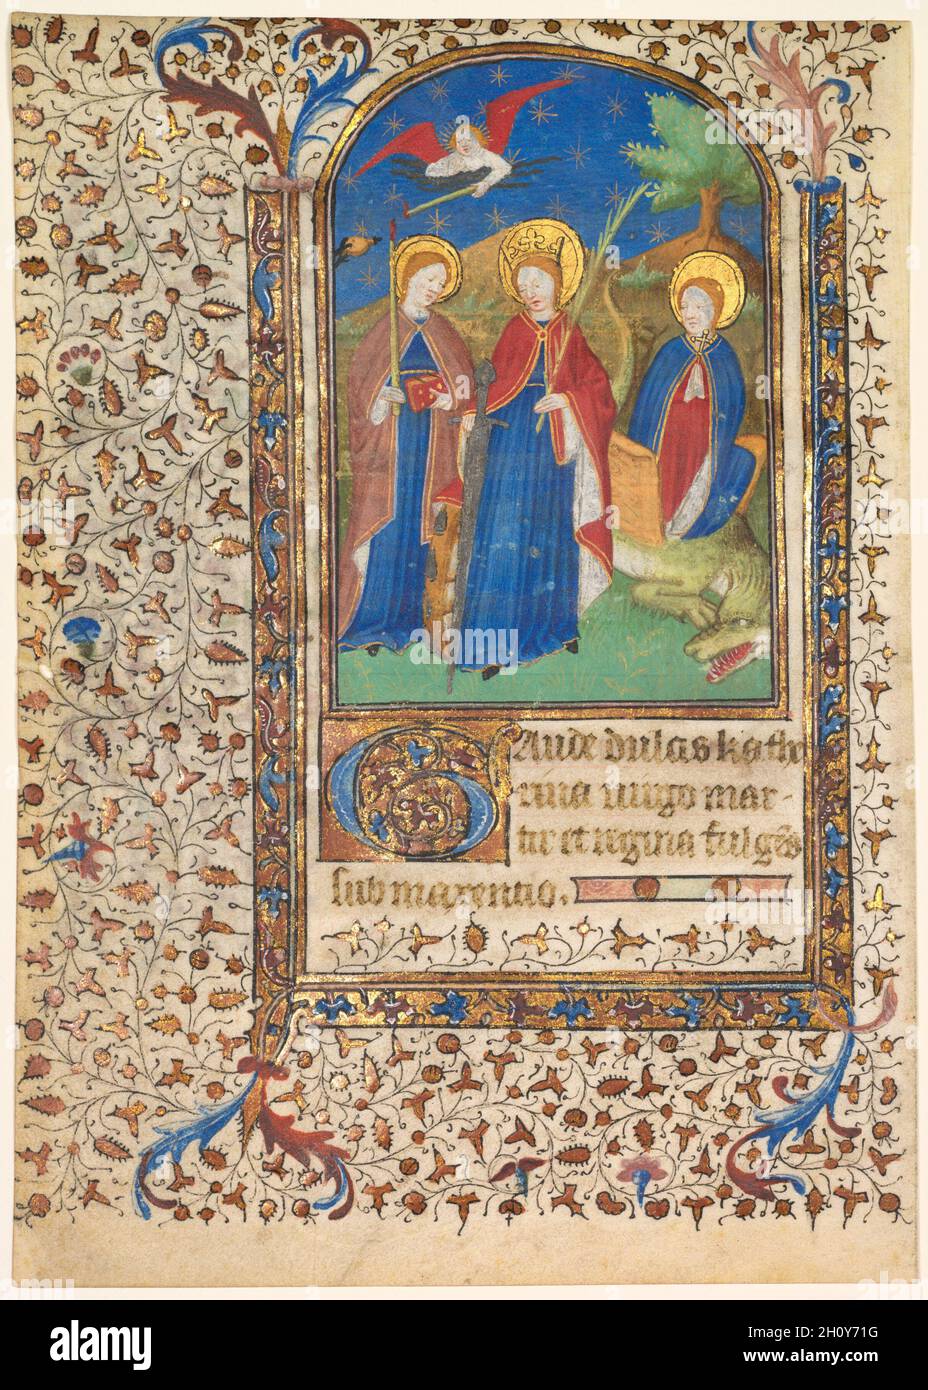 Leaf from a Book of Hours: Sts. Geneviève, Catherine of Alexandria, and Margaret (recto), c. 1415. Workshop of Boucicaut Master (French, Paris, active about 1410-25). Ink, tempera, silver, and gold on vellum; leaf: 16 x 11.2 cm (6 5/16 x 4 7/16 in.).  In a book of hours, the suffrages generally appear at the end of the manuscript and consist of prayers to particular saints, often illustrated by miniatures. Saints were the protectors and patrons of medieval people, and countless owners of books of hours must have been consoled by reciting these prayers and readings that contained elements of pr Stock Photo